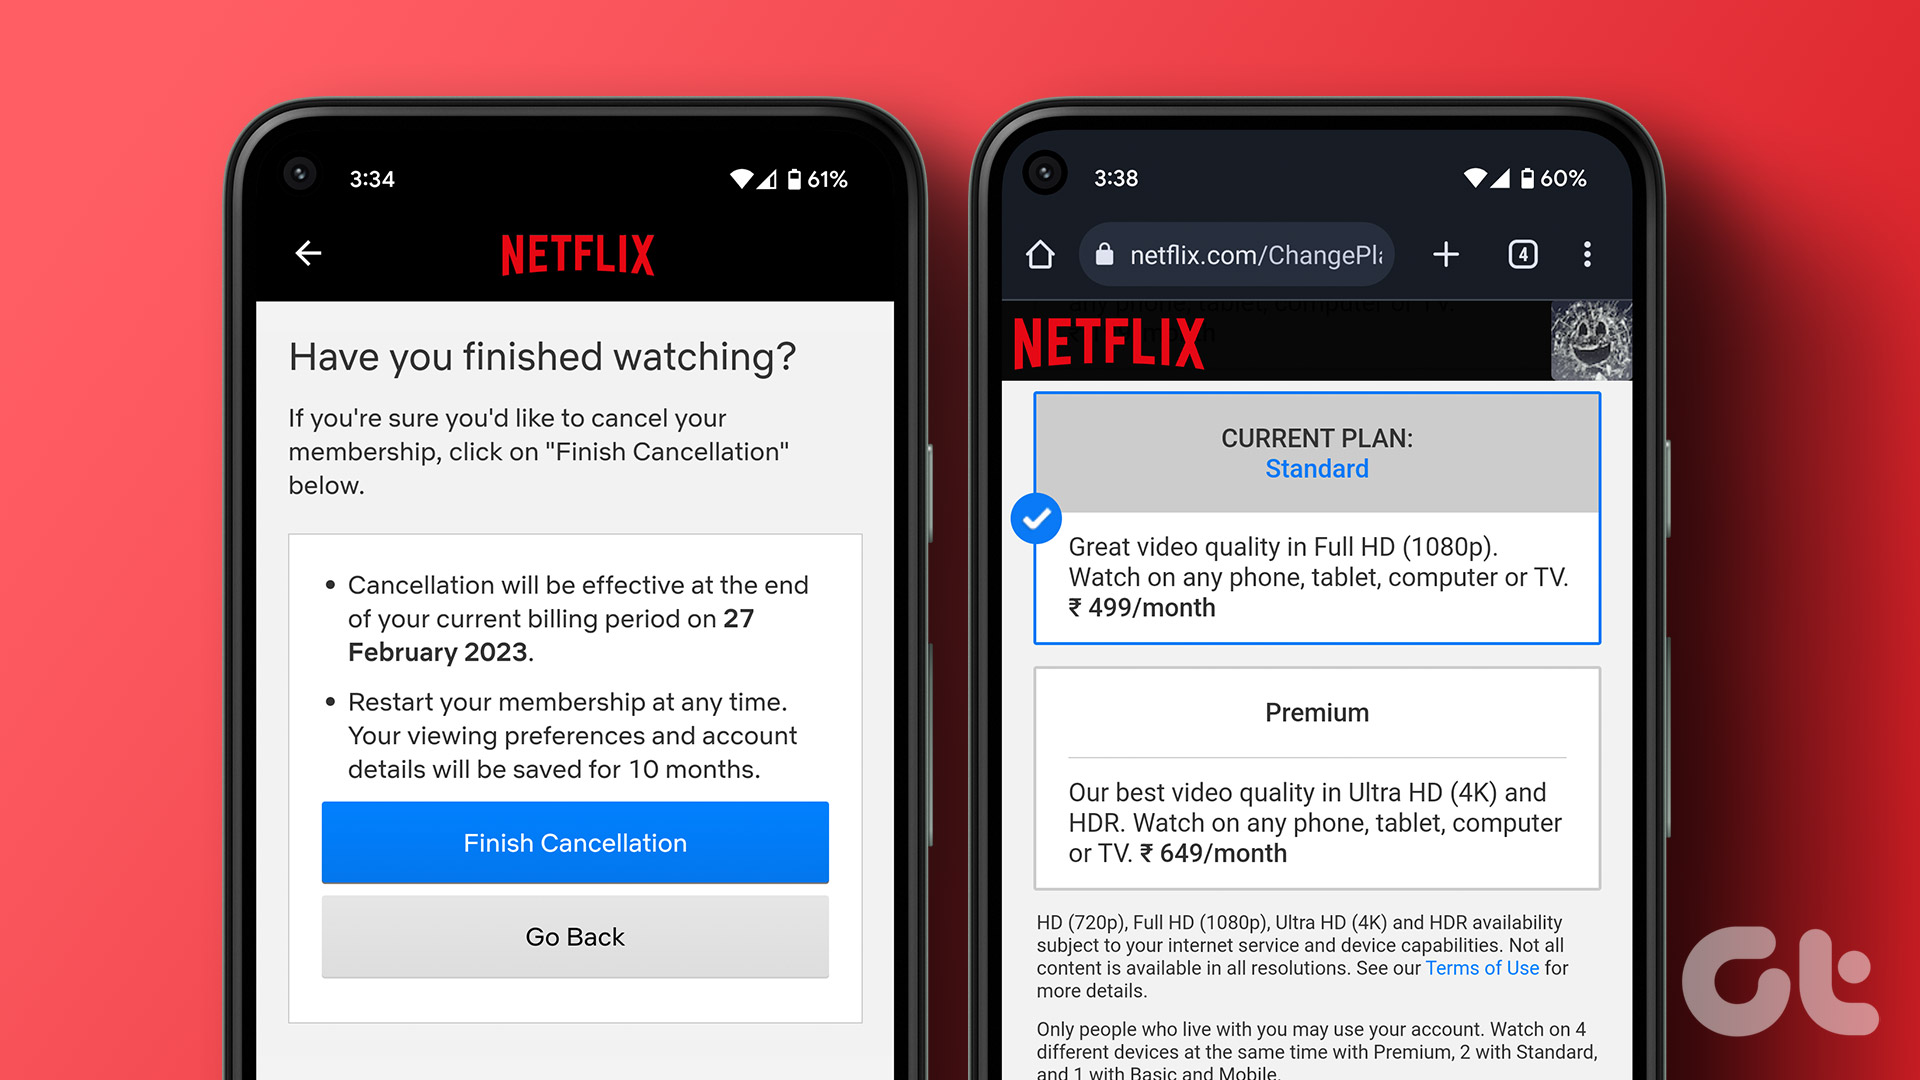 How to Change or Cancel Netflix Plan